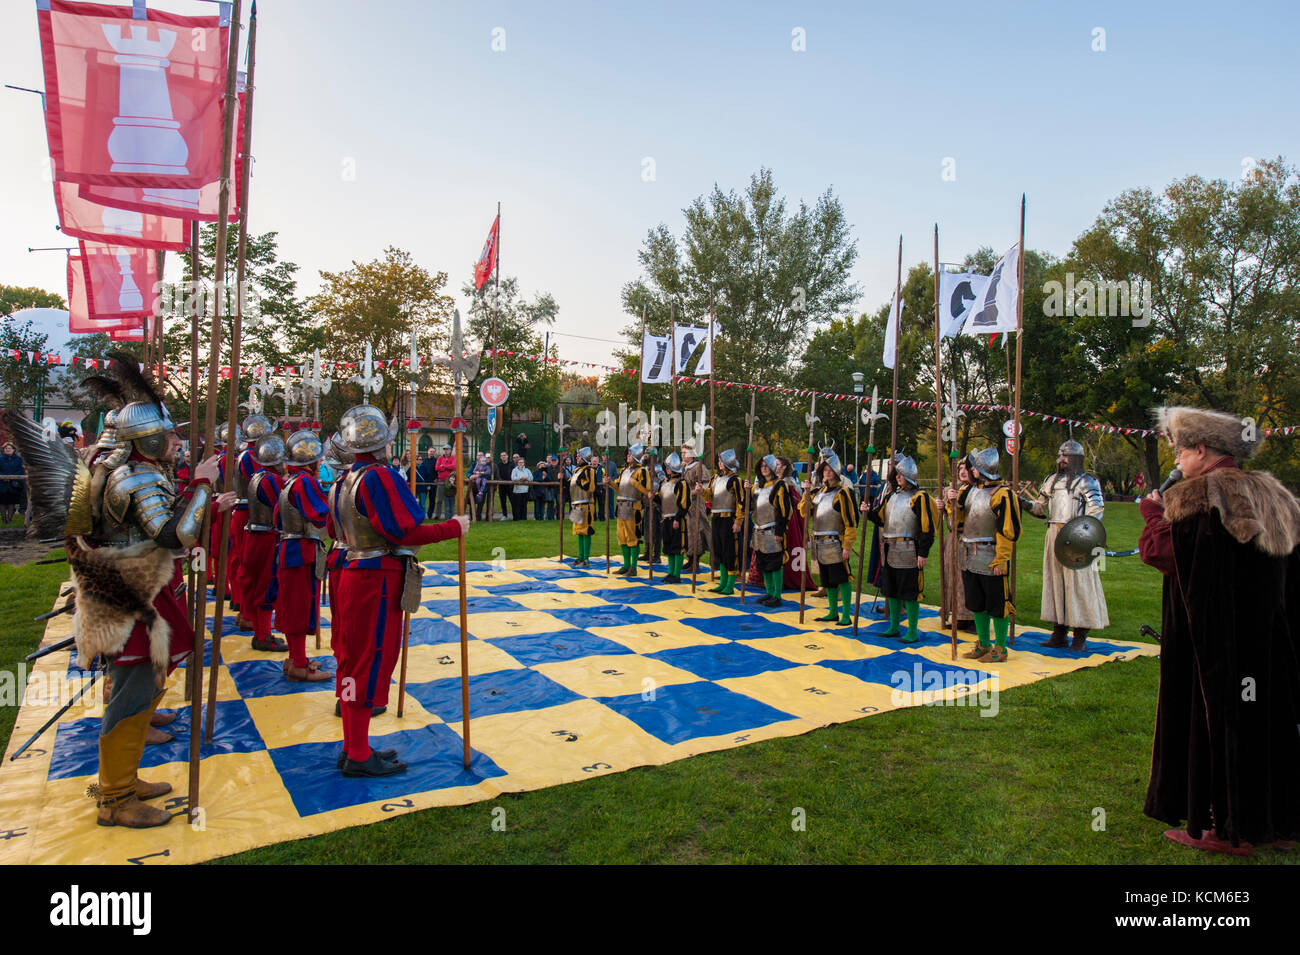 Performance devoted to the Battle of Vienna 1683 as a chess game staged by live playing pieces at the foot of Pultusk Castle in Mazovia, Poland. Stock Photo